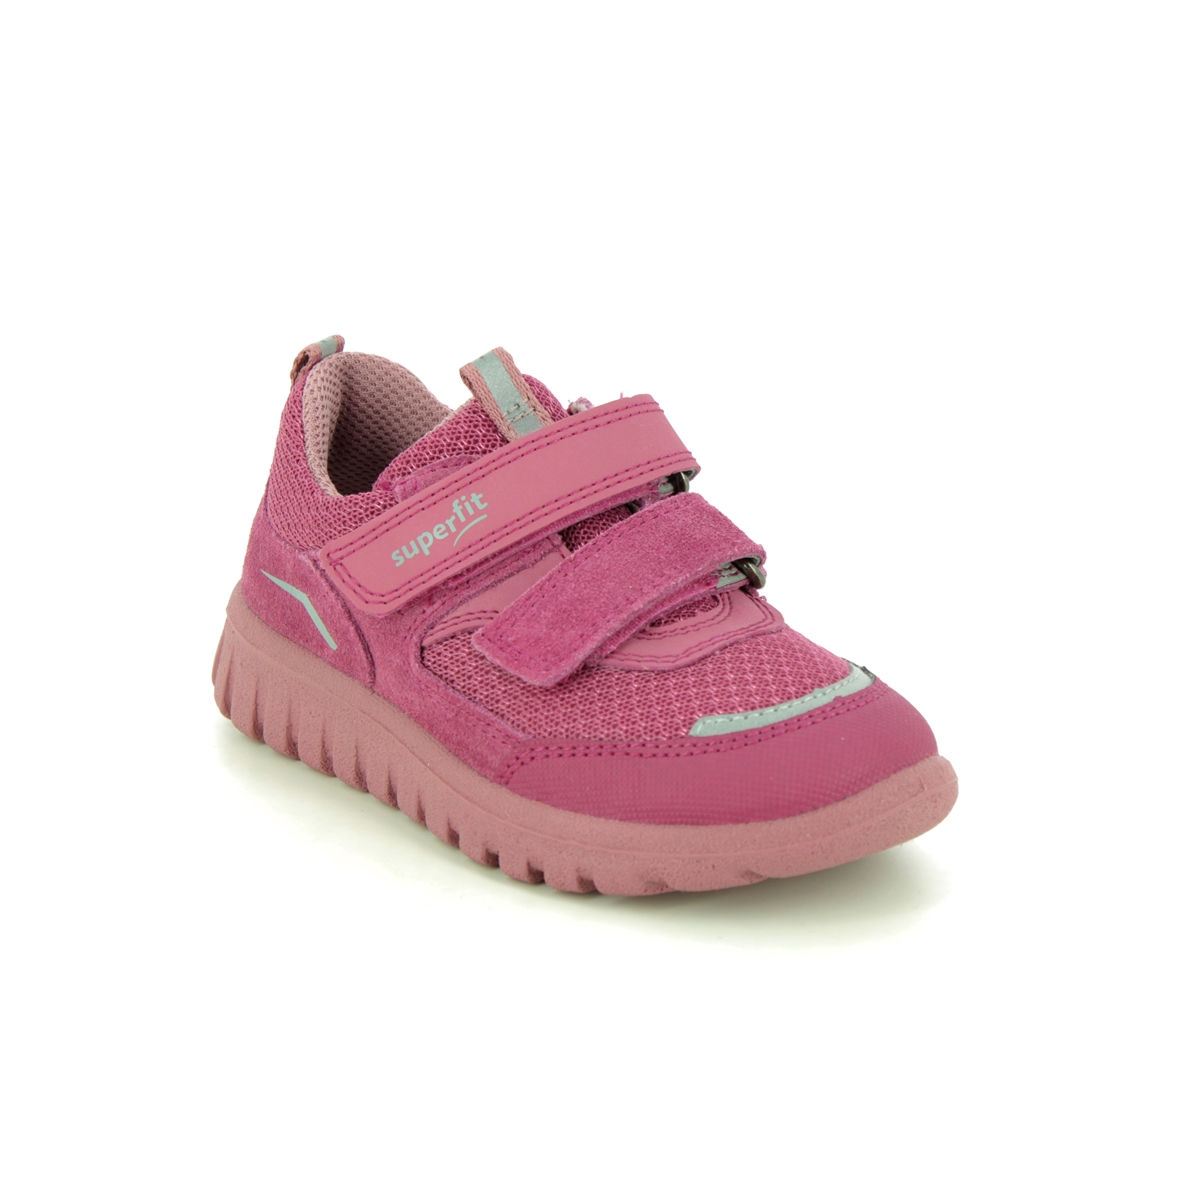 Superfit Sport7 Mini 2V Hot Pink Kids Girls Trainers 1006194-5520 In Size 28 In Plain Hot Pink For kids